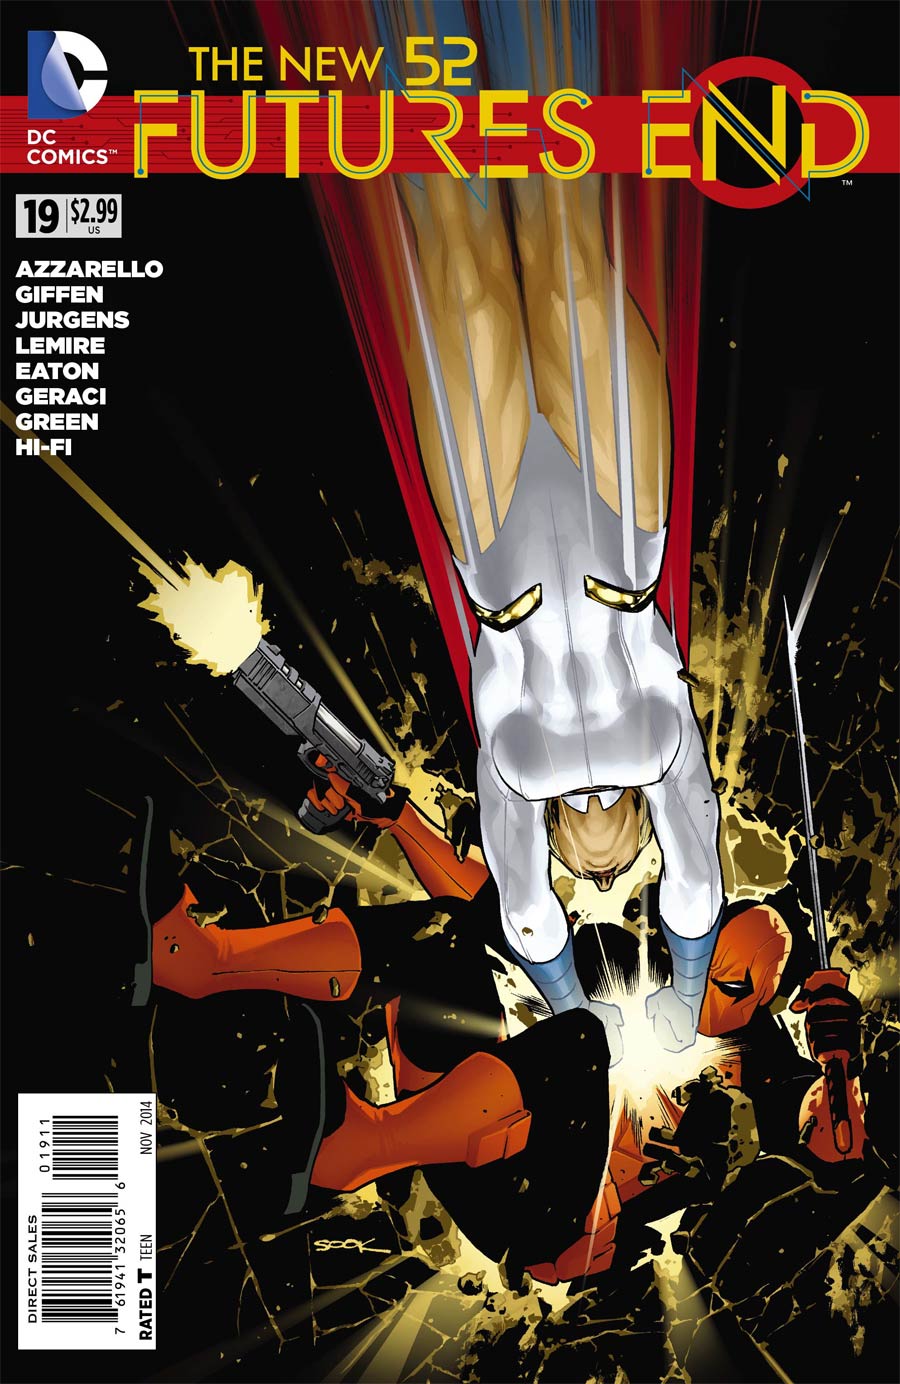 New 52 Futures End #19